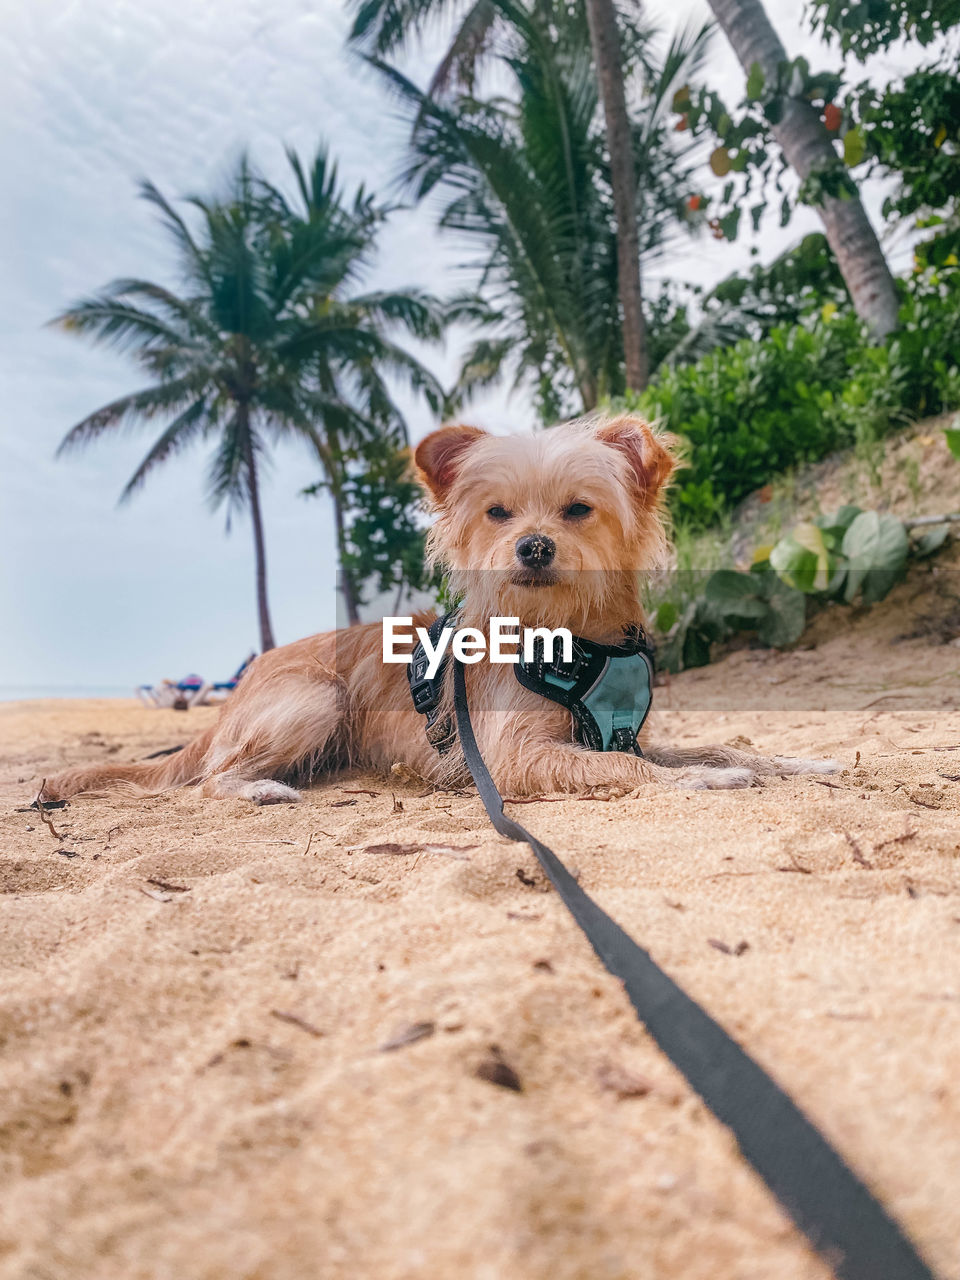 mammal, animal themes, pet, domestic animals, animal, one animal, dog, canine, tree, palm tree, plant, nature, terrier, land, tropical climate, portrait, sand, no people, day, yorkshire terrier, beach, norfolk terrier, lap dog, outdoors, looking at camera, looking, sky